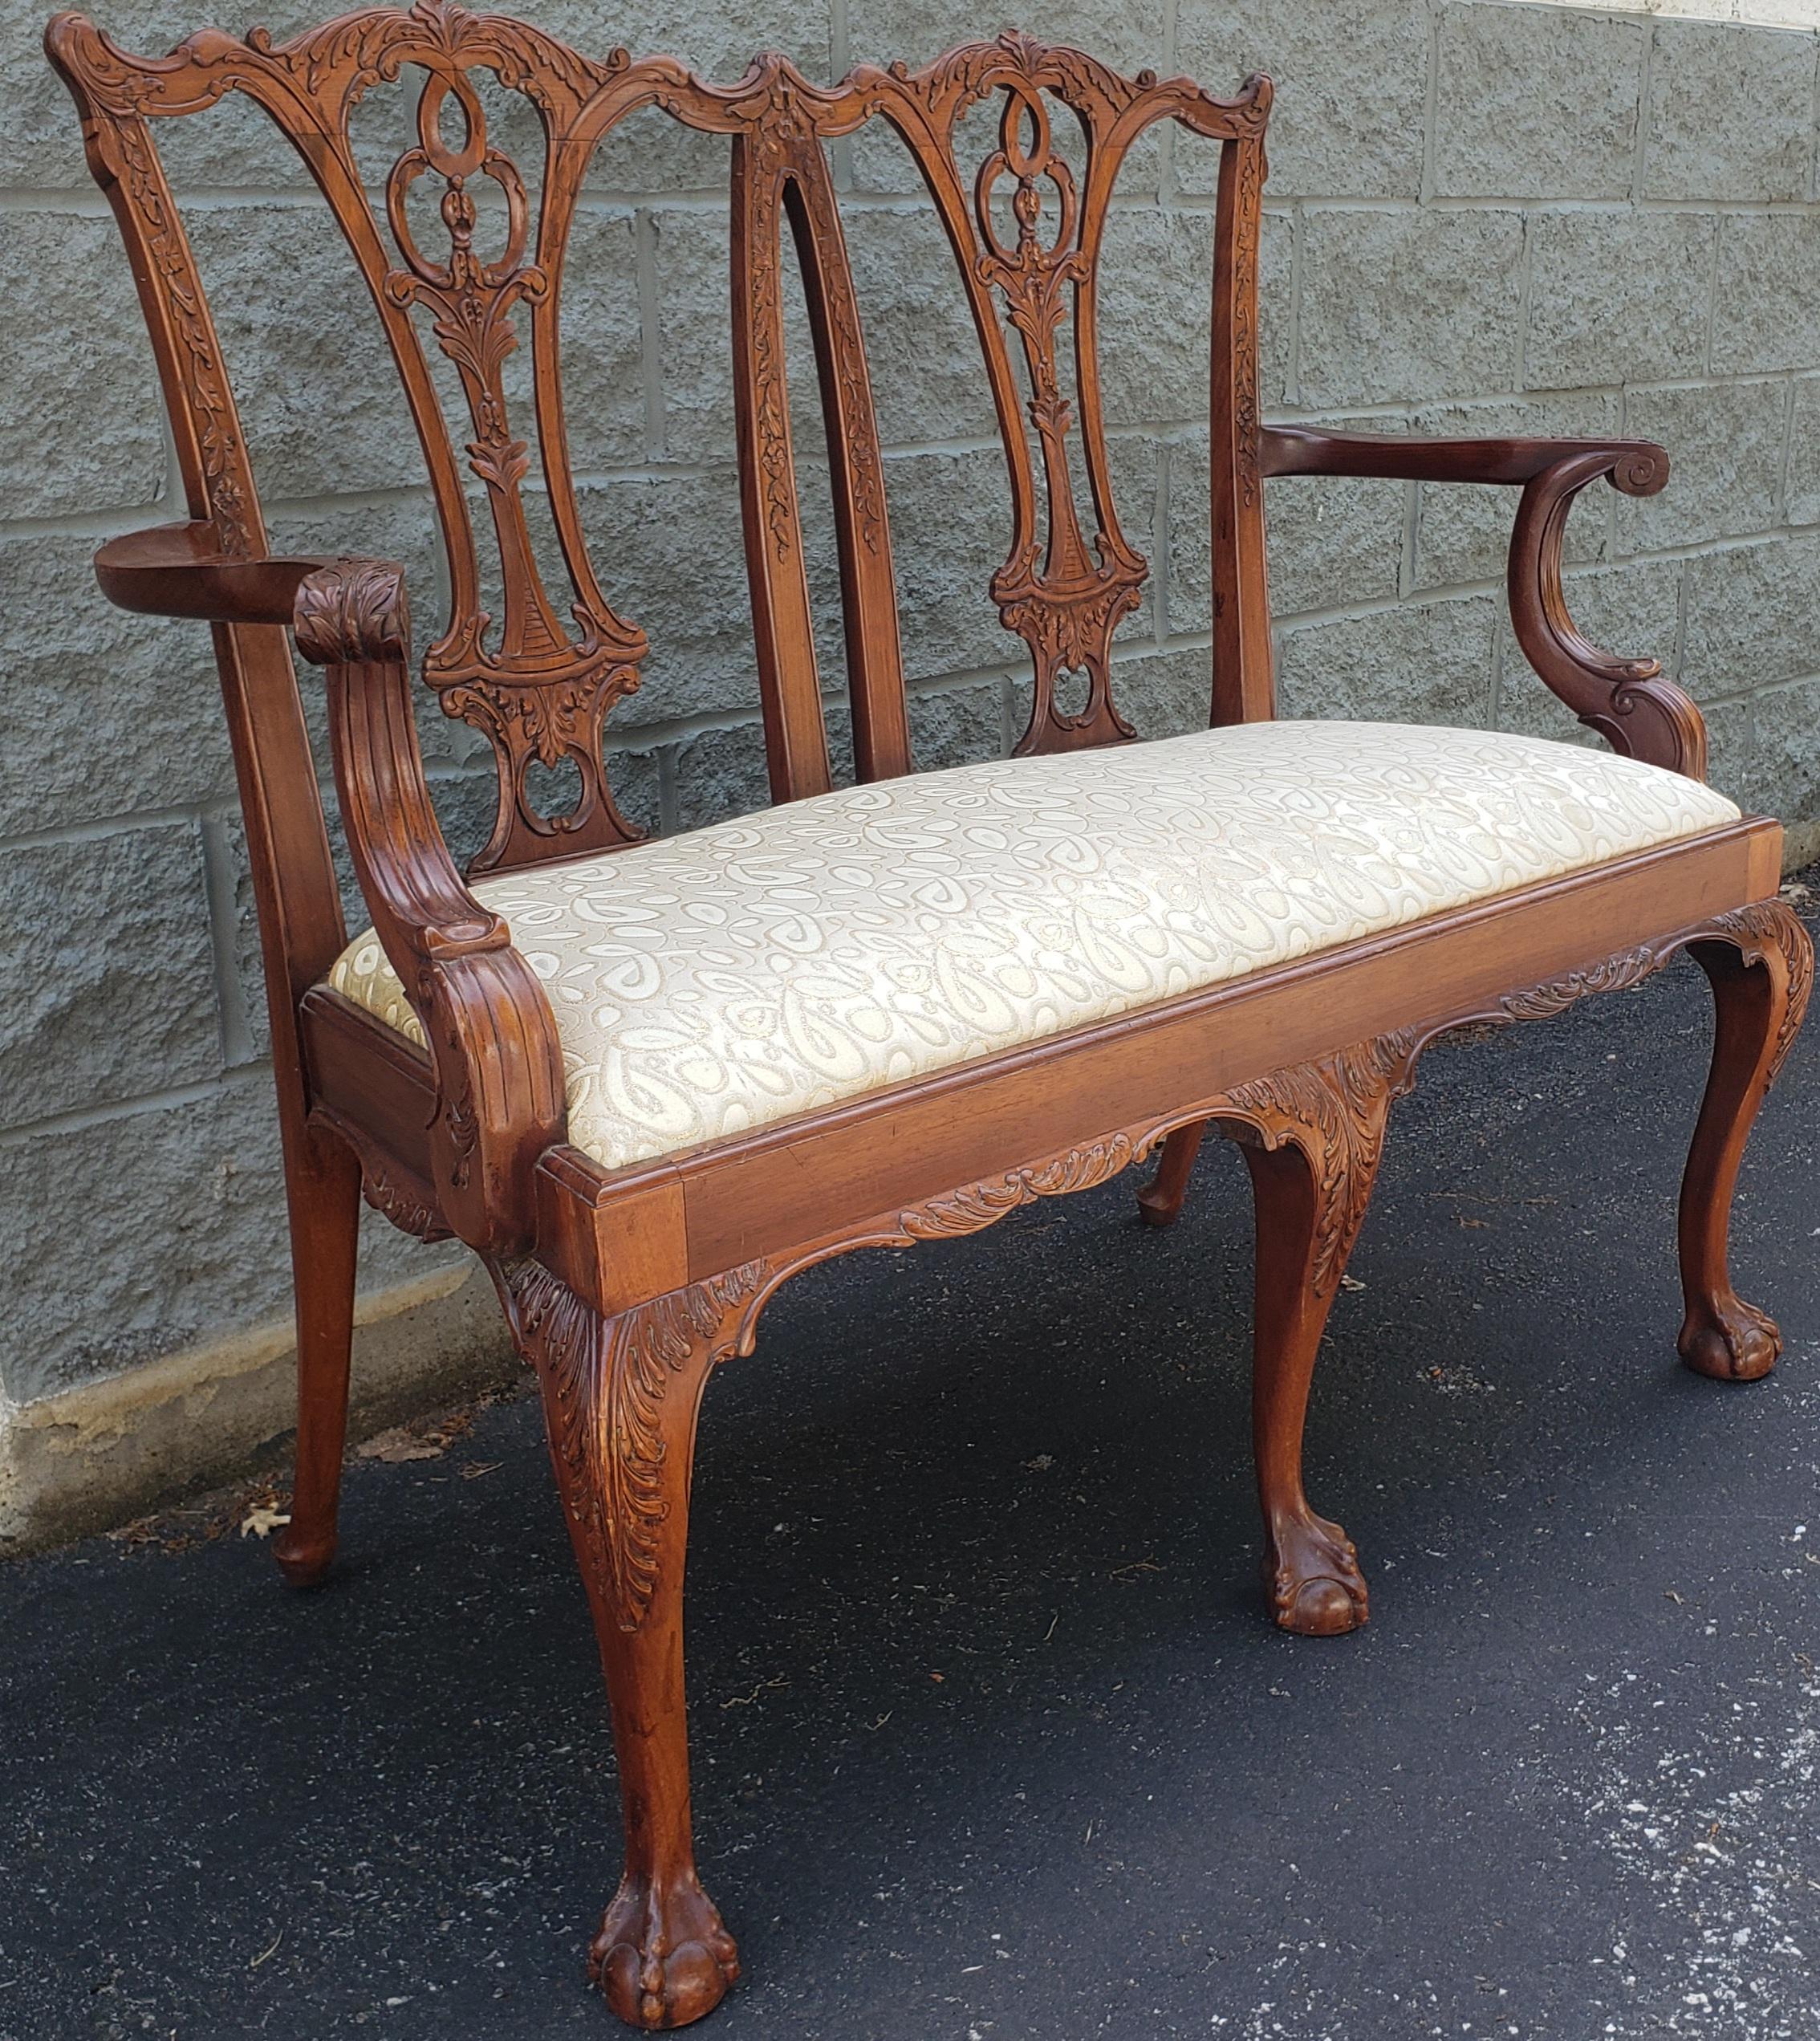 An intricately high quality crafted and hand carved Chippendale style mahogany settee with ball claw feet in good vintage condition.
The High quality upholstery is clean. Measures 47.5